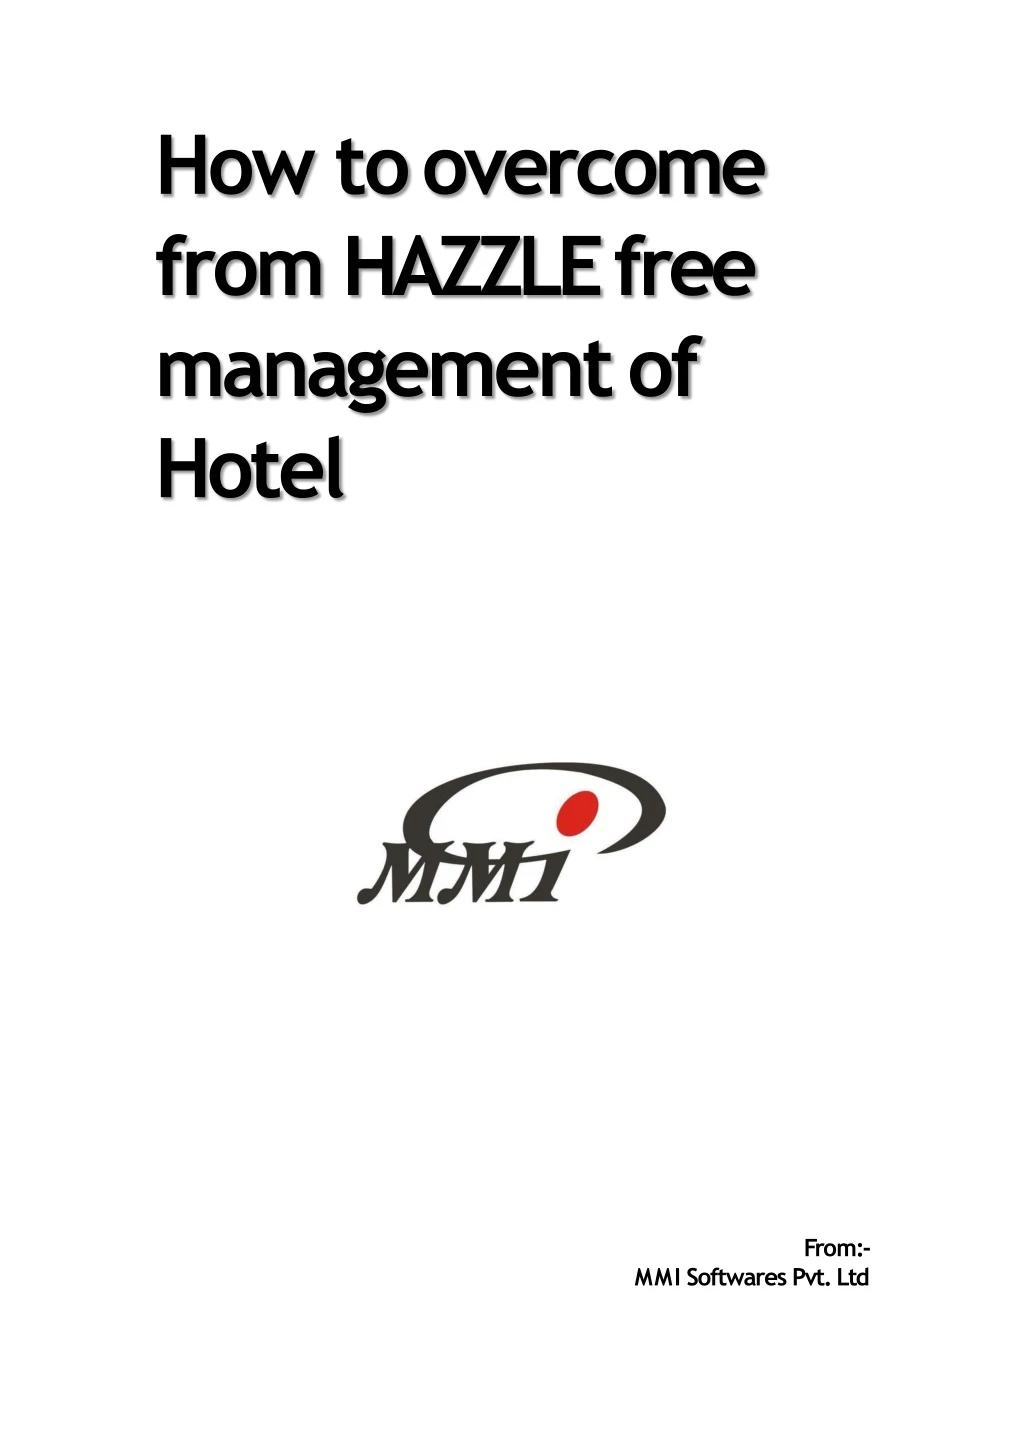 how to overcome from hazzle free management